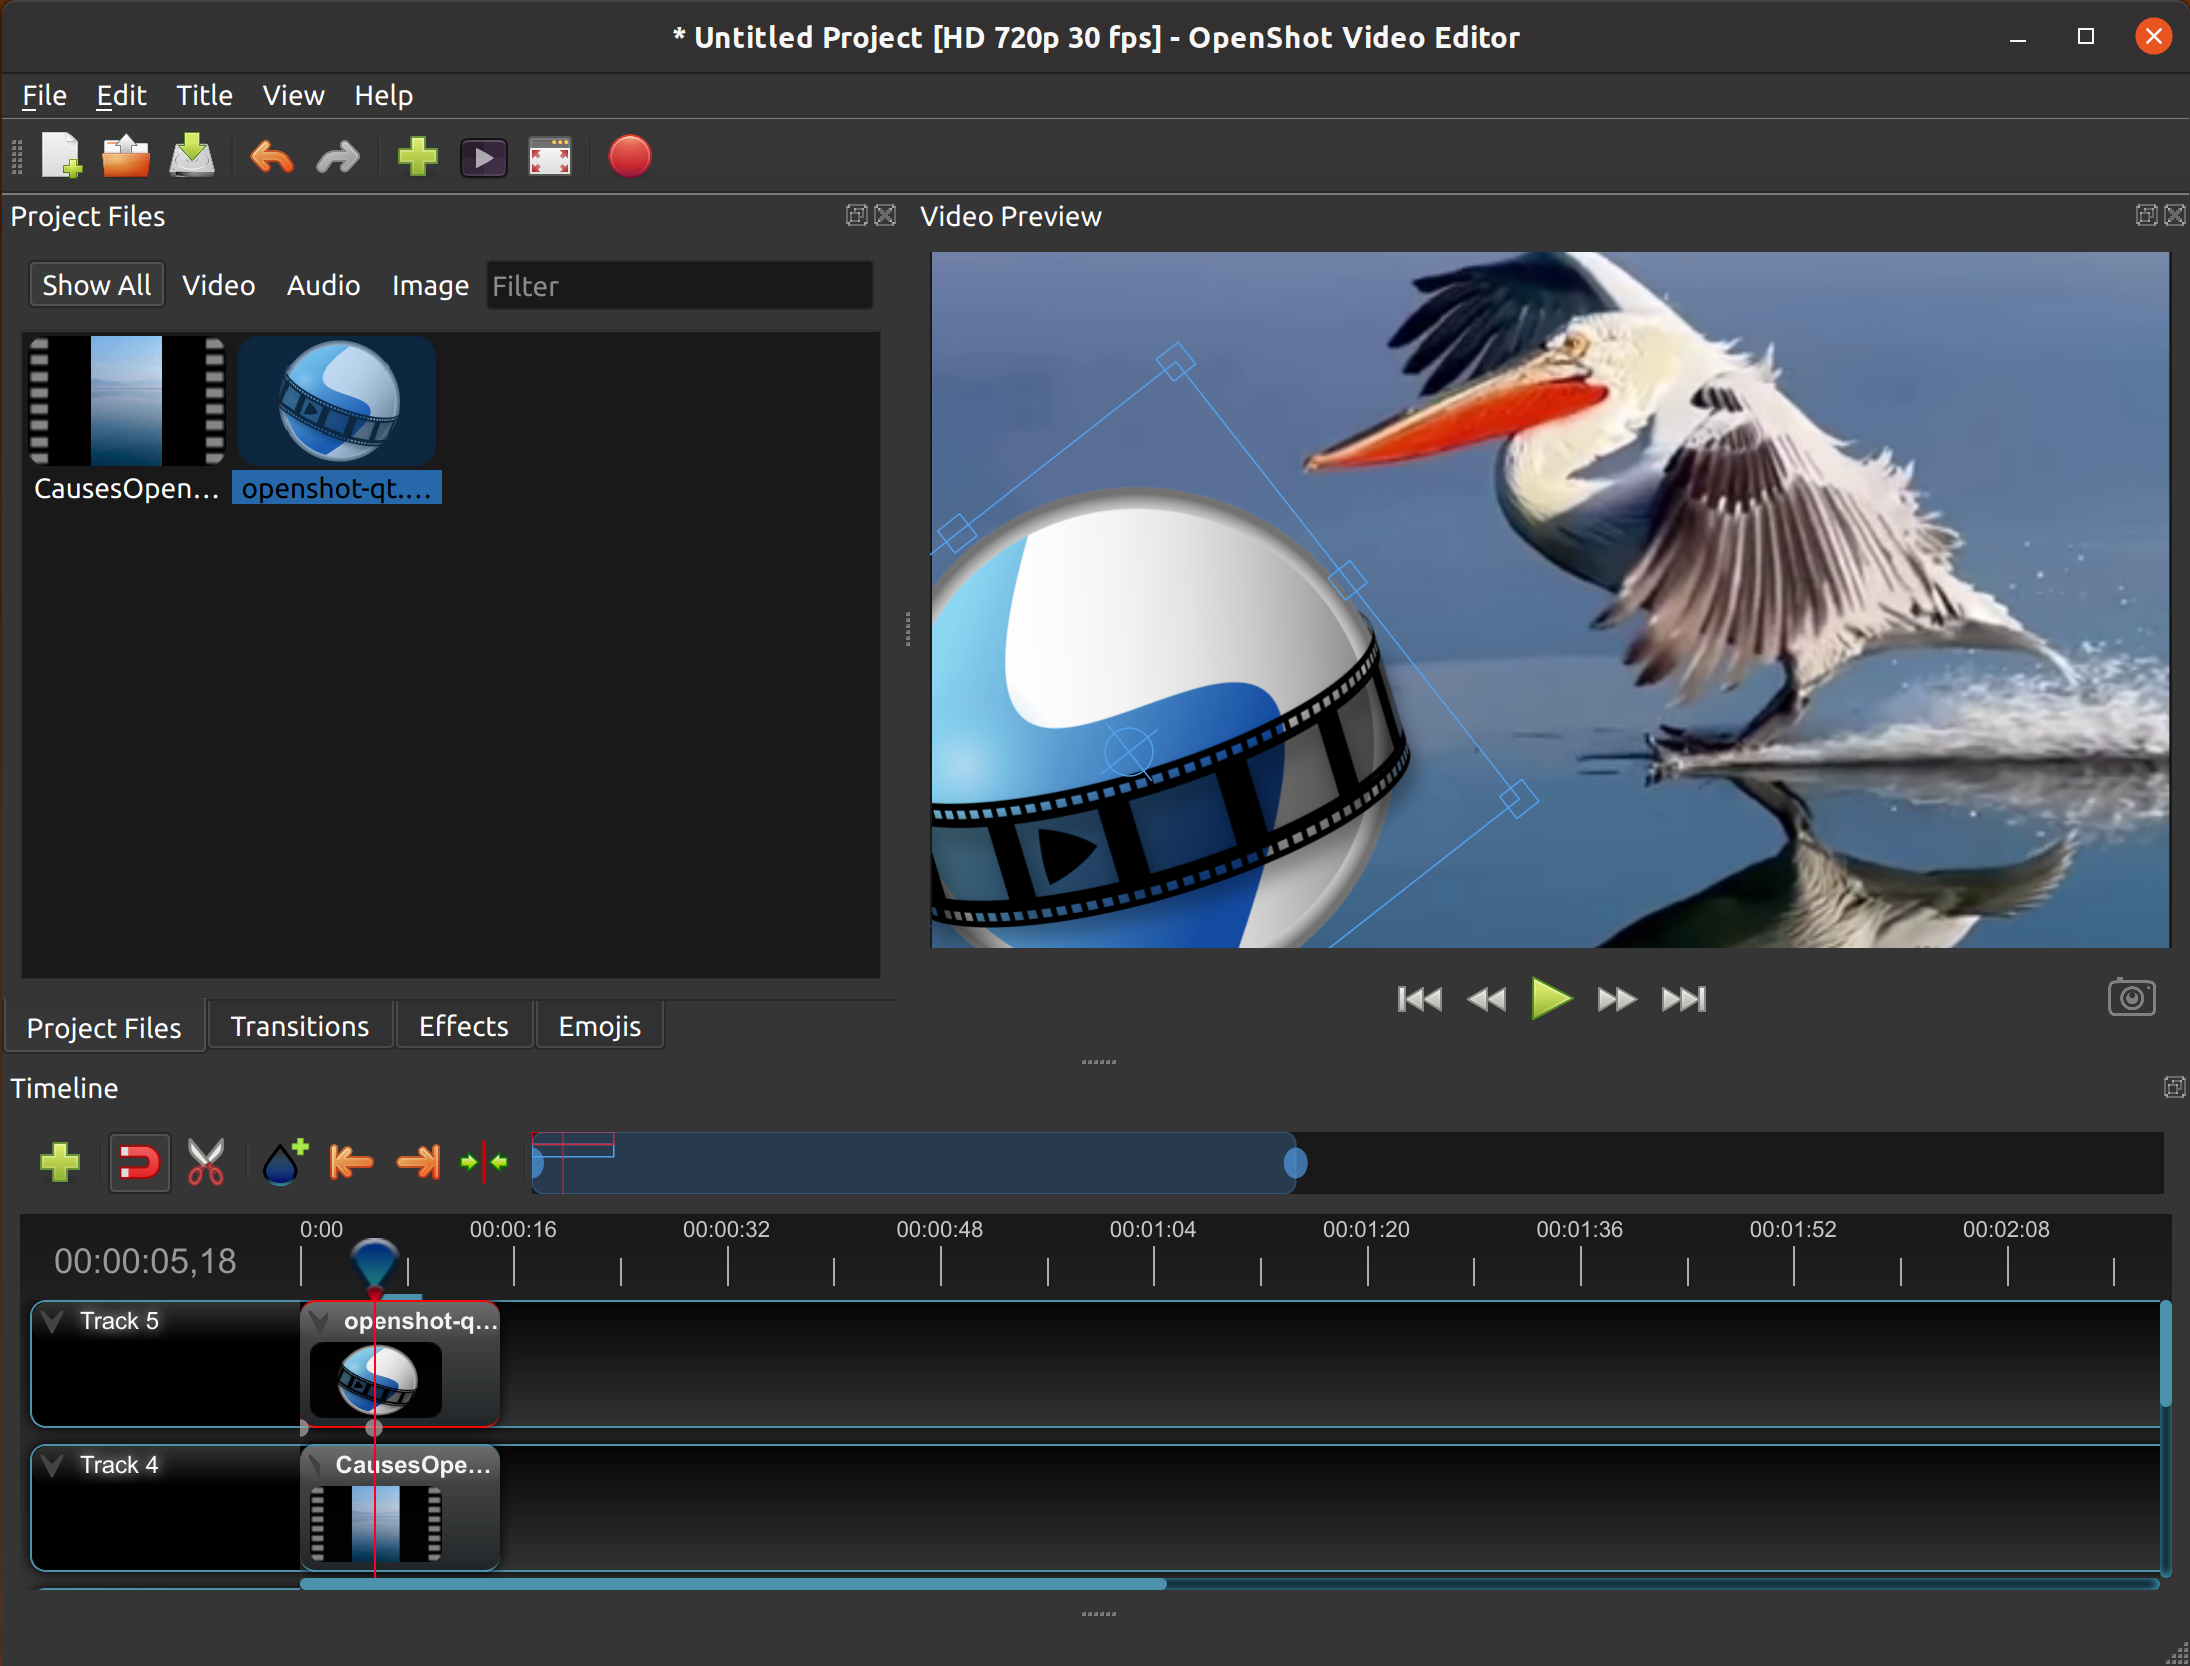 OpenShot Video Editor | OpenShot 3.1.1 Released | Improved Tracker & Object  Detection, Bug Fixes & Quality-of-Life Improvements